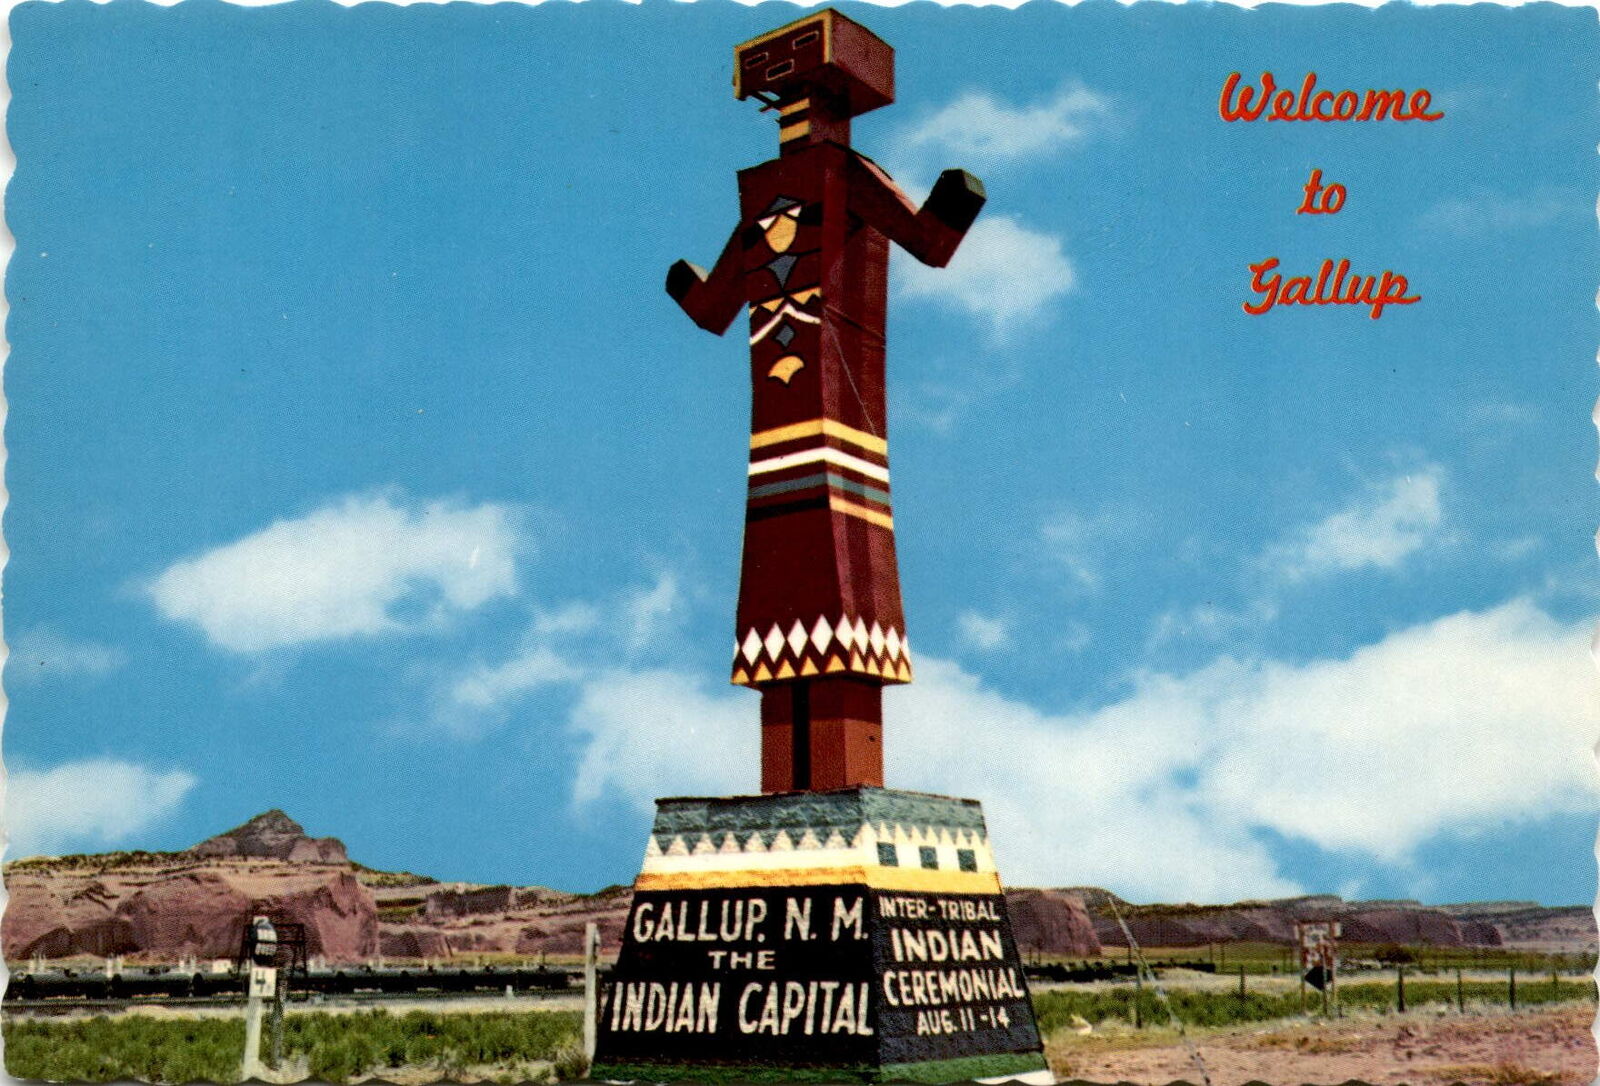 Colorful Indian Doll Welcomes Travelers to Gallup